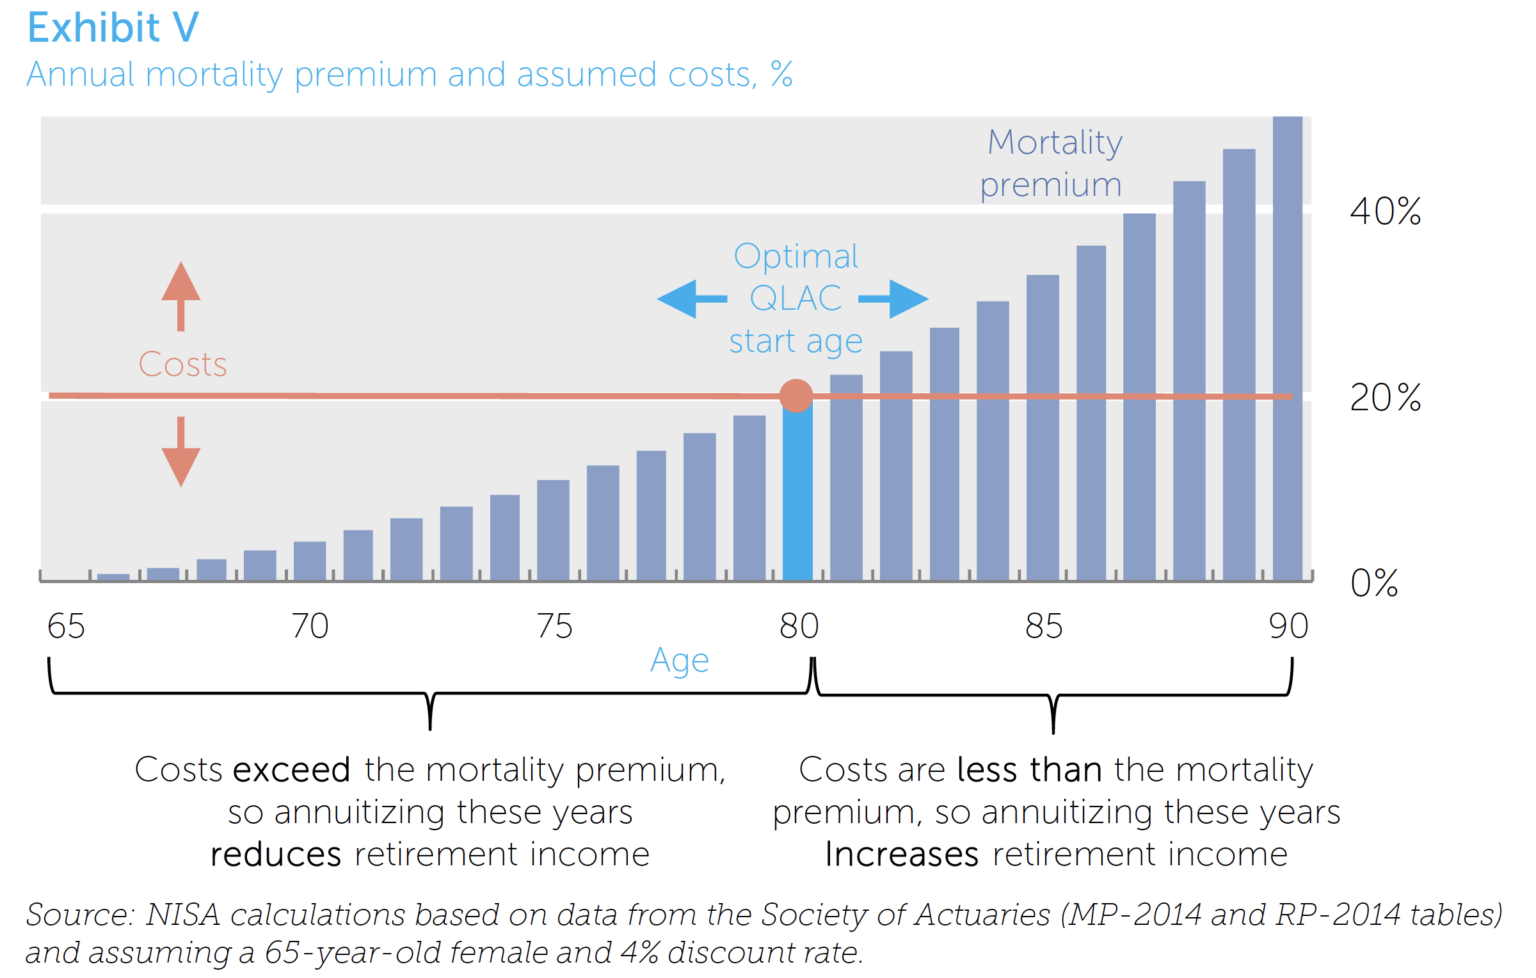 Exhibit V Annual Mortality Premium and Assumed Costs